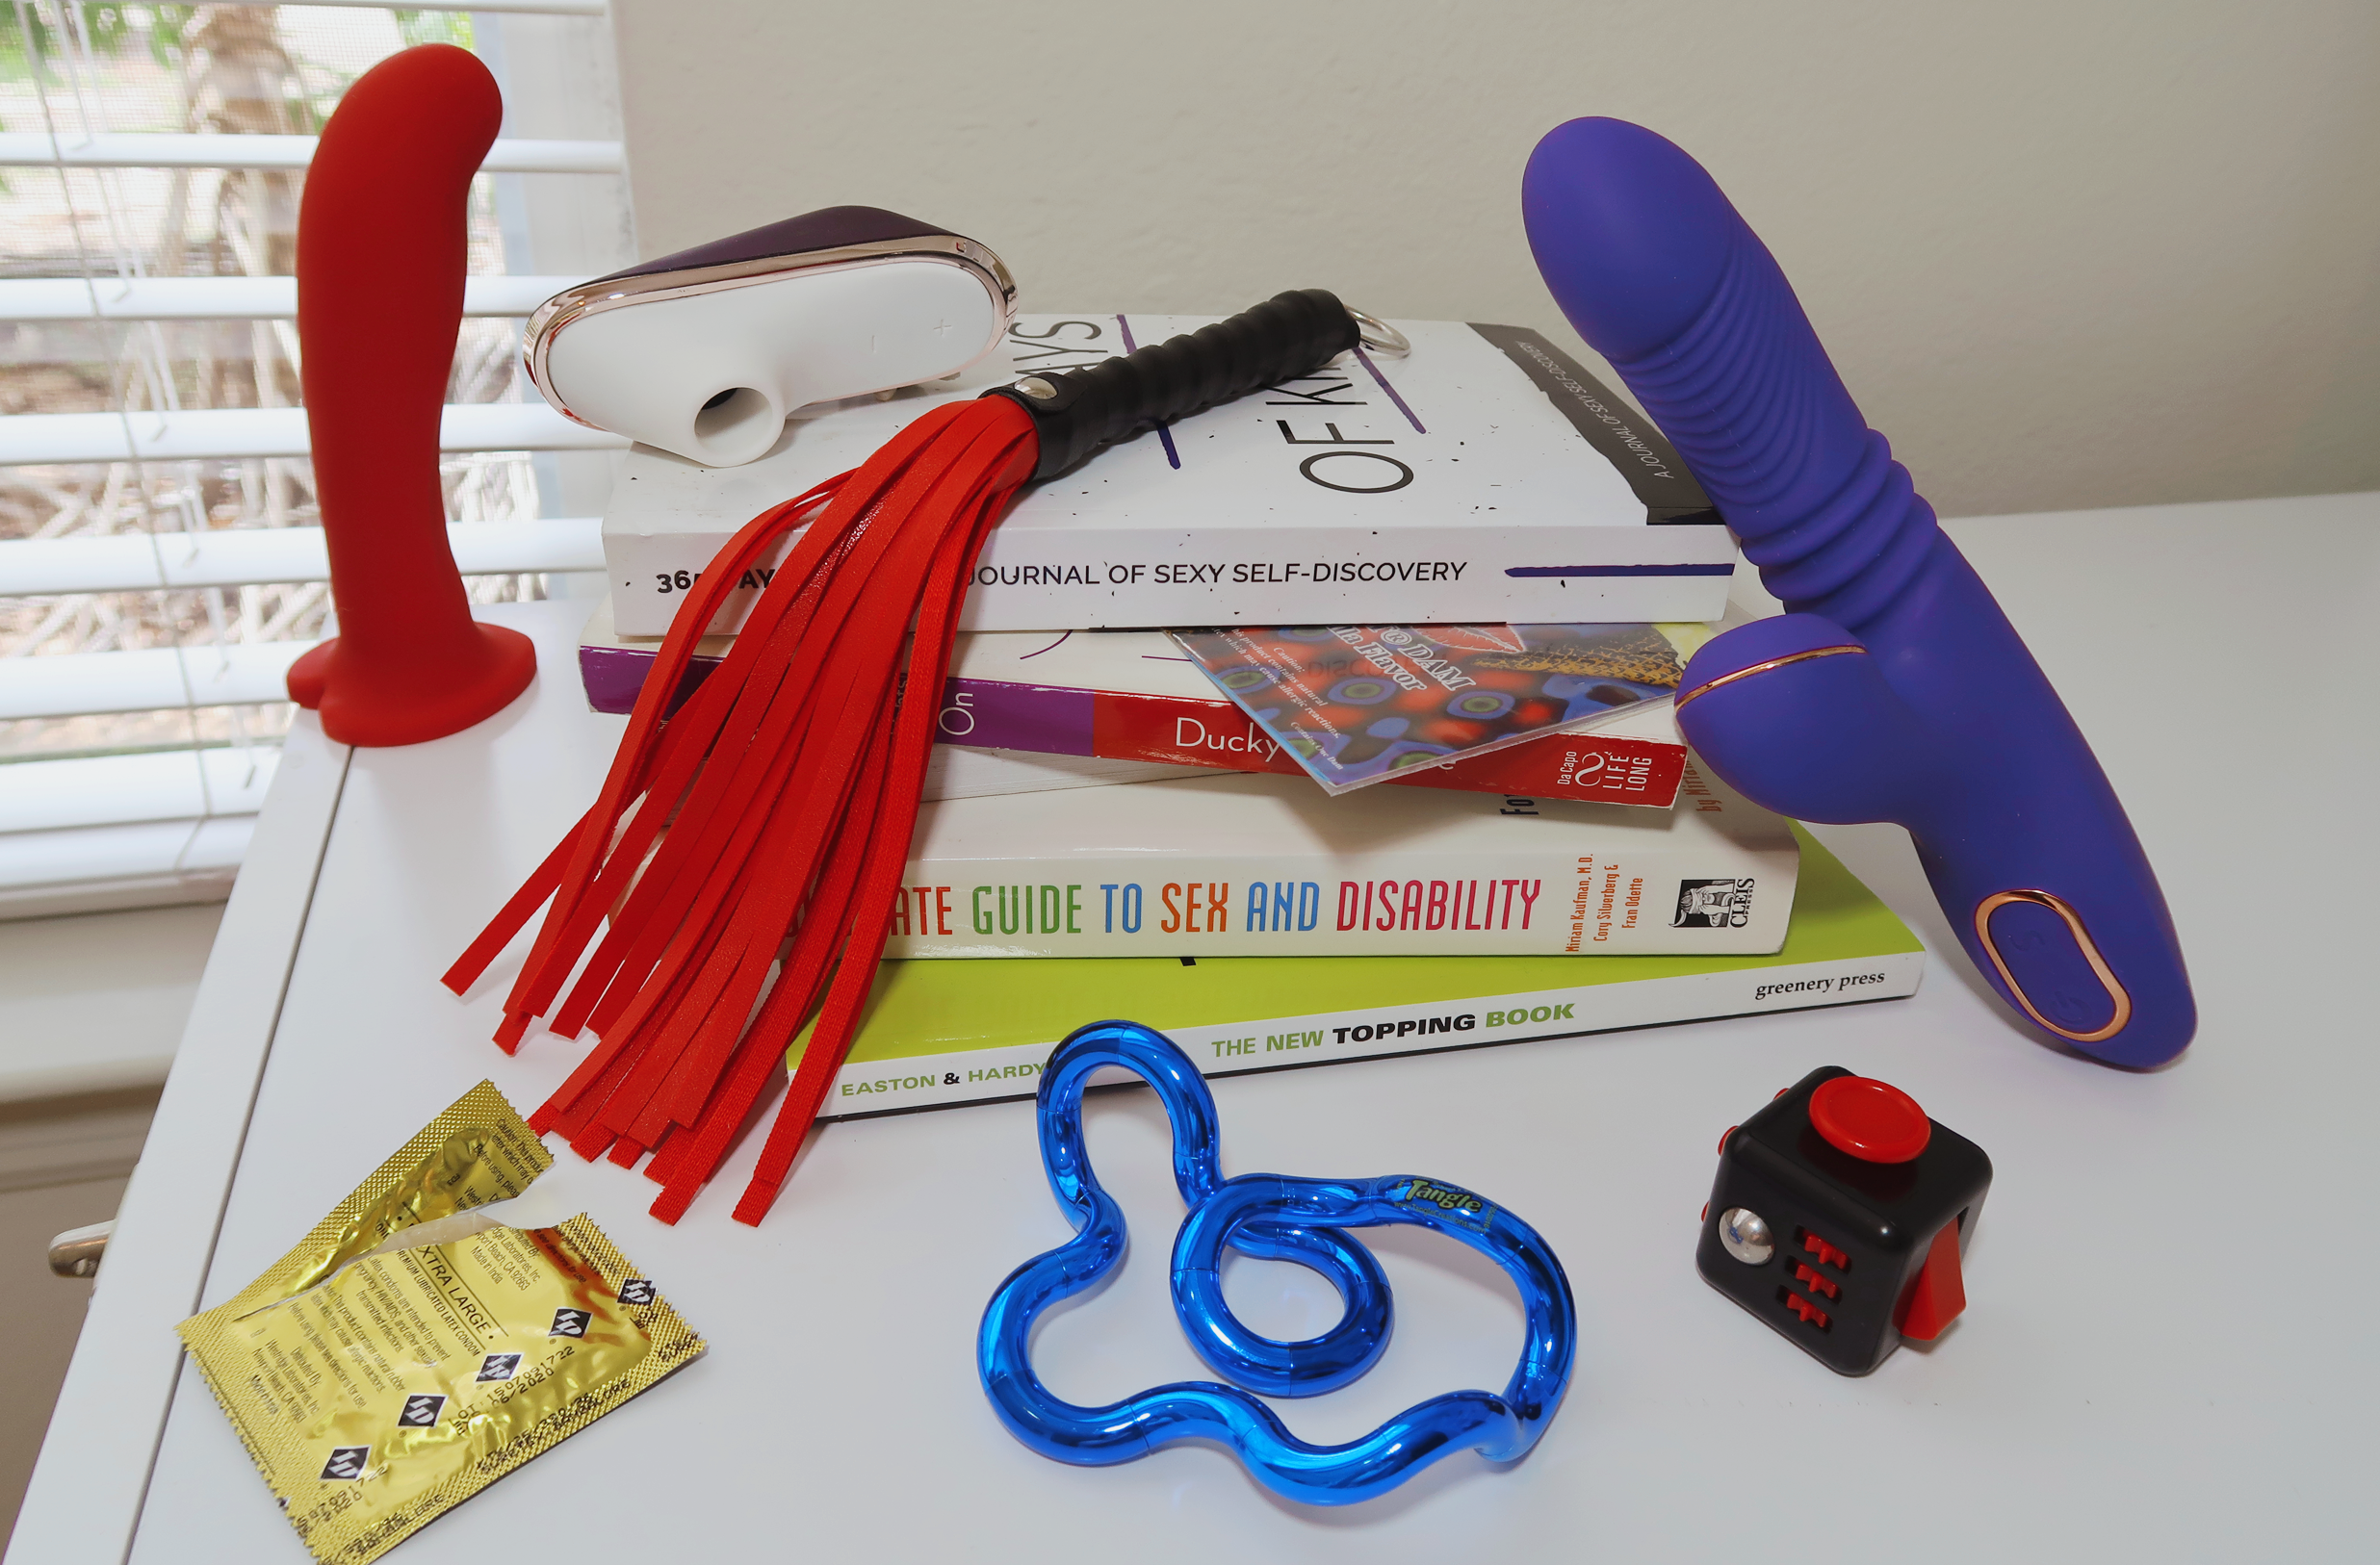 A pile of books surrounded by several sex toys and stim toys.